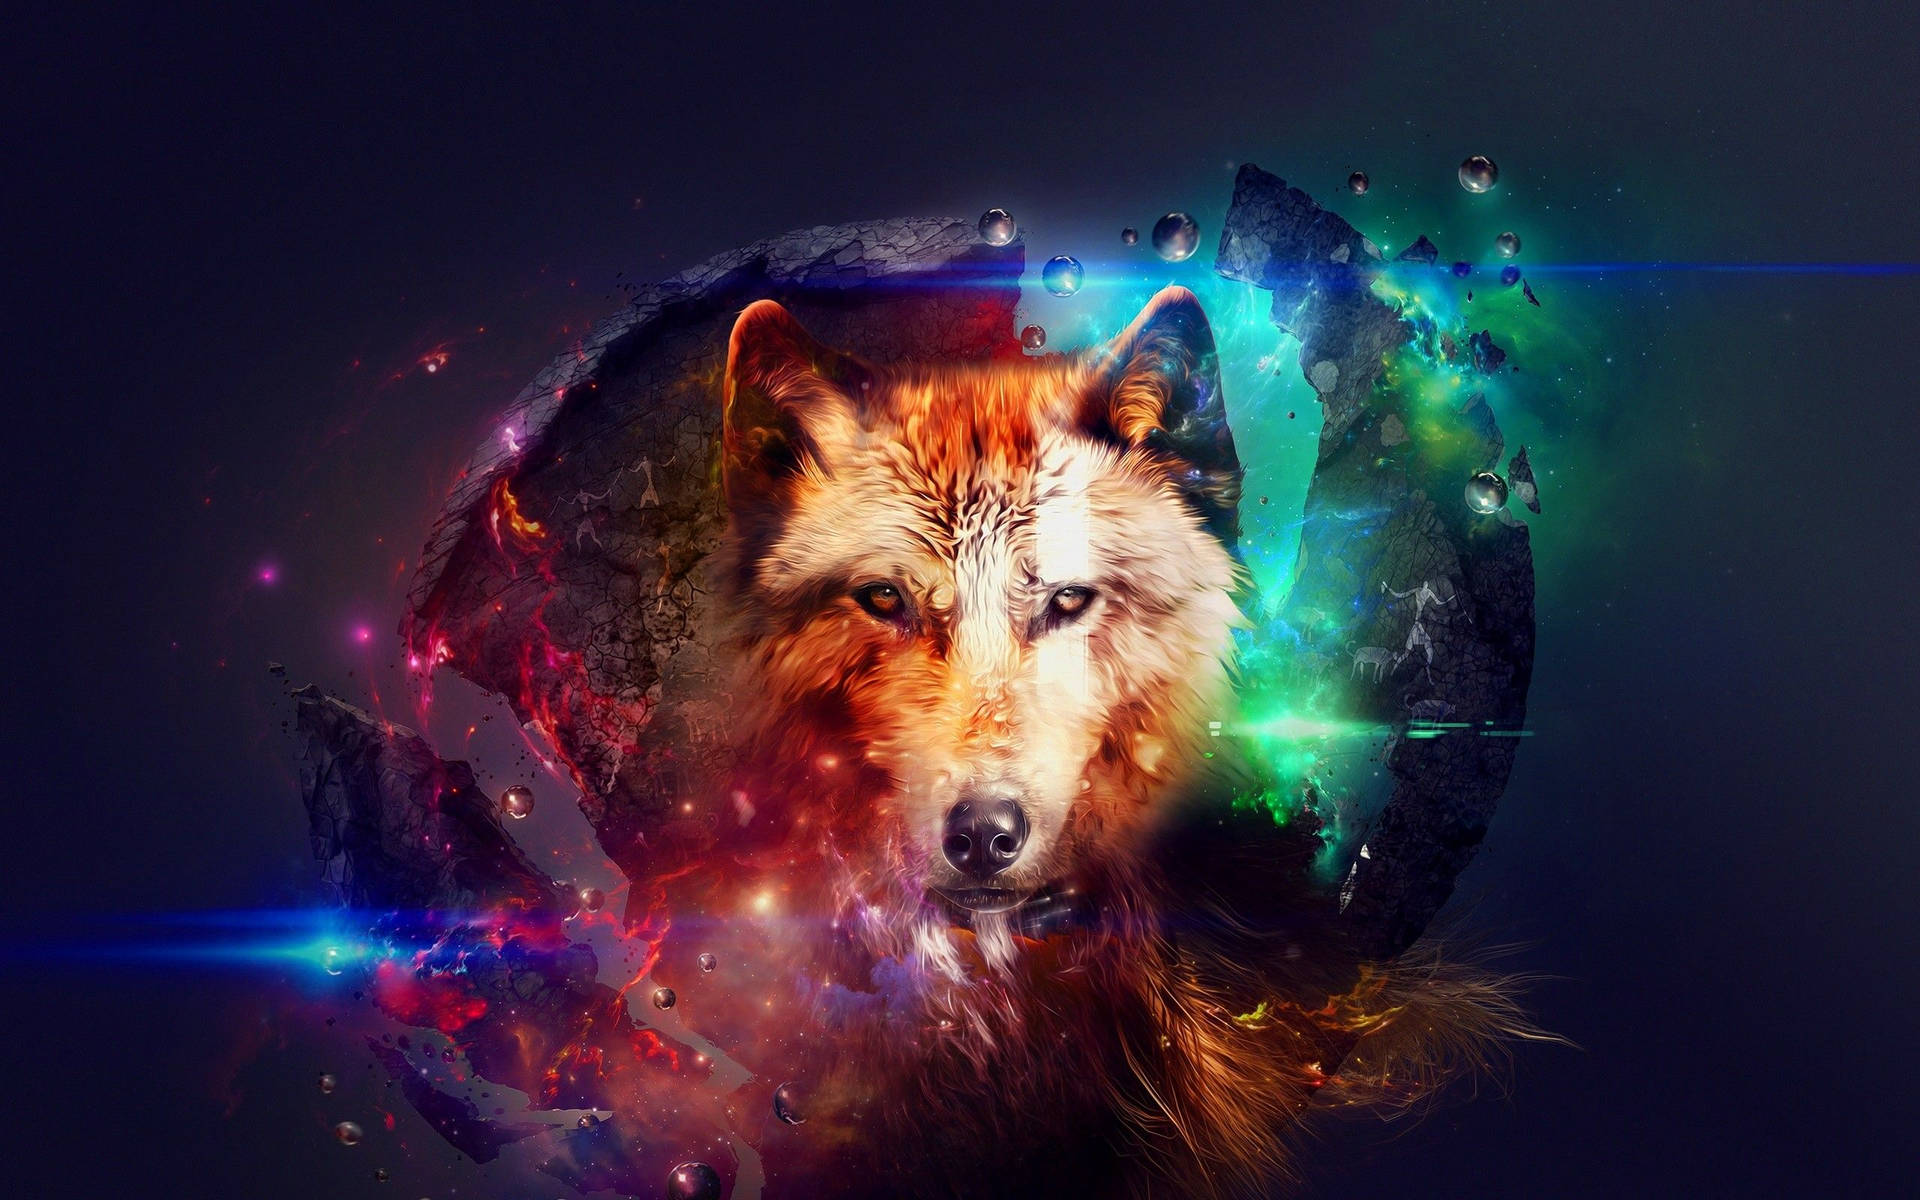 Free Galaxy Wolf Wallpaper Downloads, [100+] Galaxy Wolf Wallpapers for  FREE 